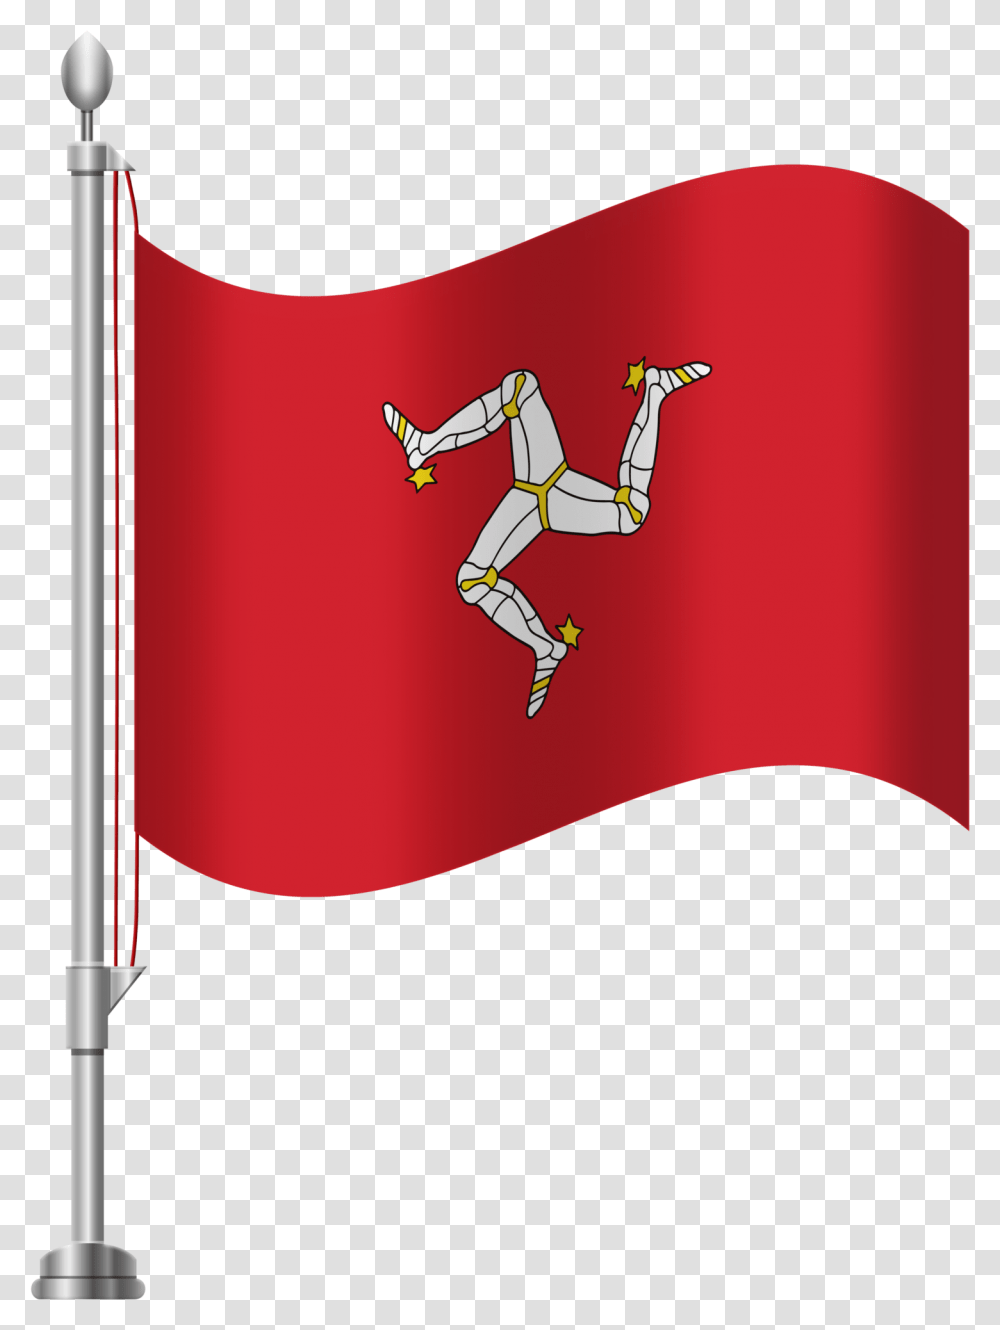 Isle Of Man Flag Clip Art Honduras Flag On Pole, Person, Sport, People, Text Transparent Png